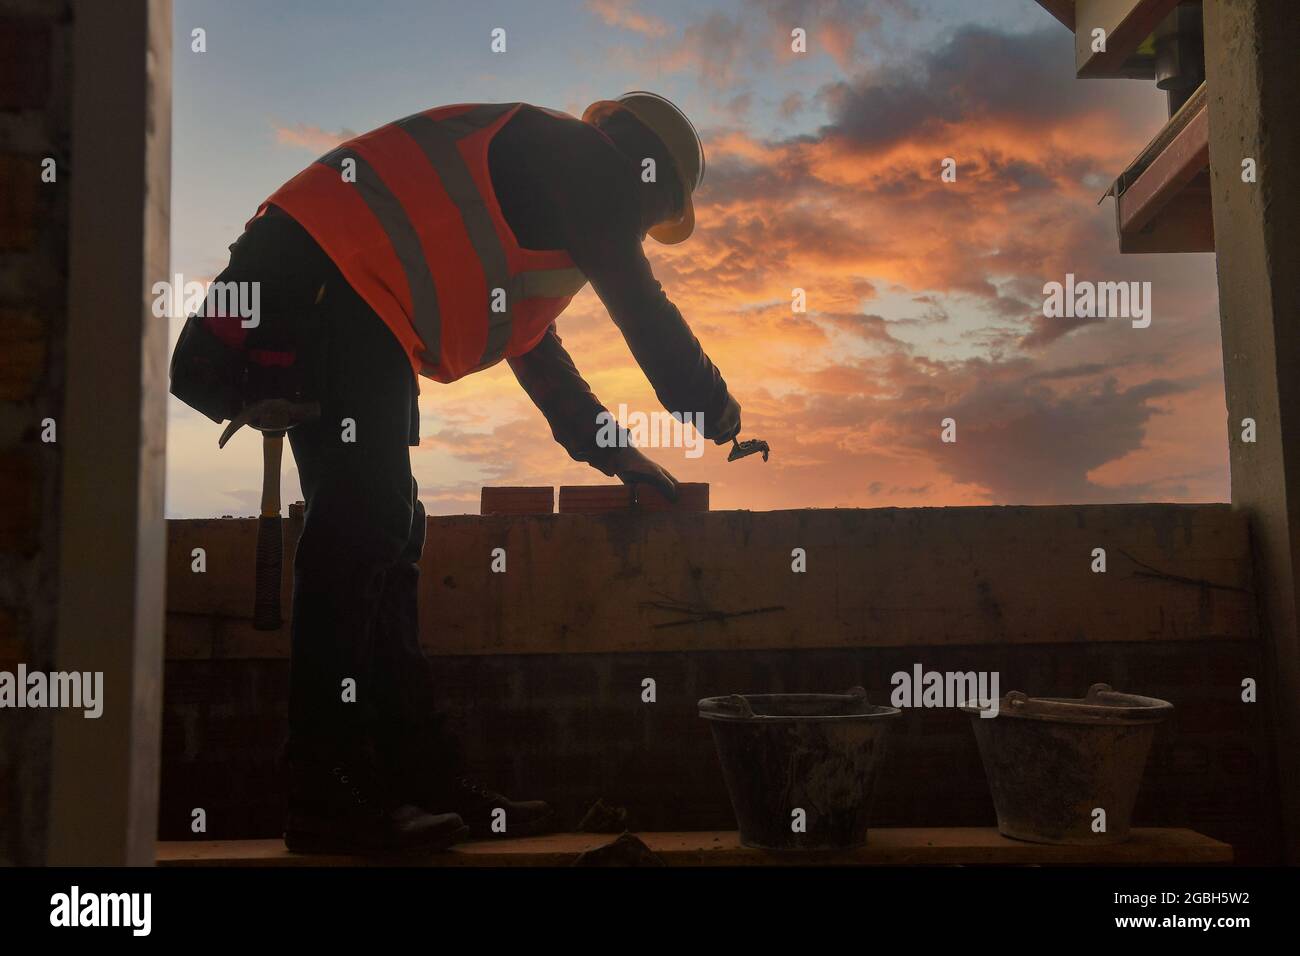 Bricklayer building a wall on a construction site, Thailand Stock Photo